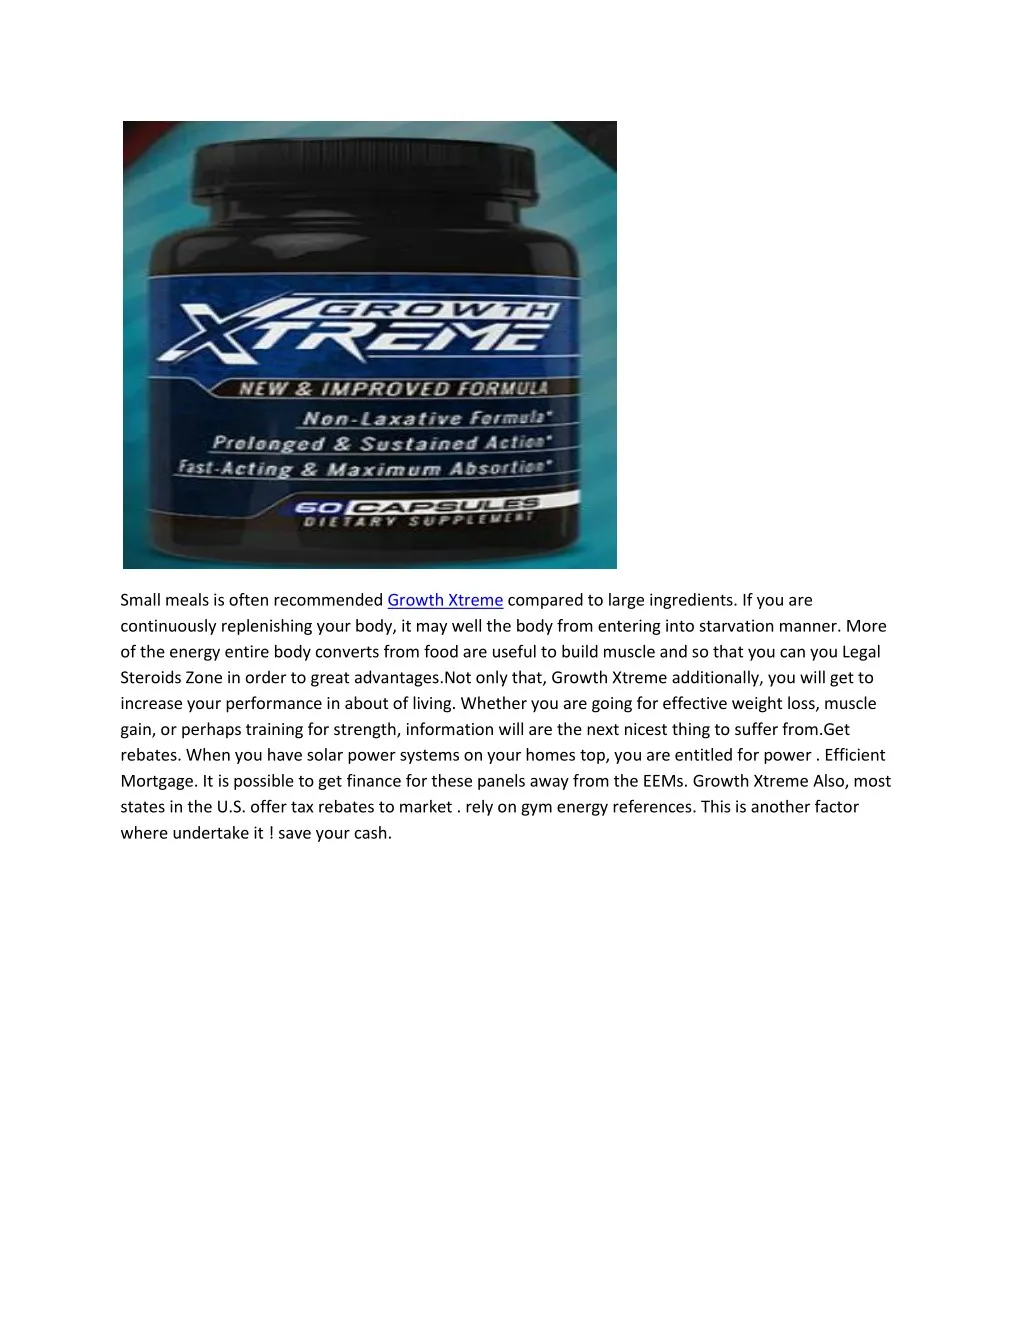 small meals is often recommended growth xtreme